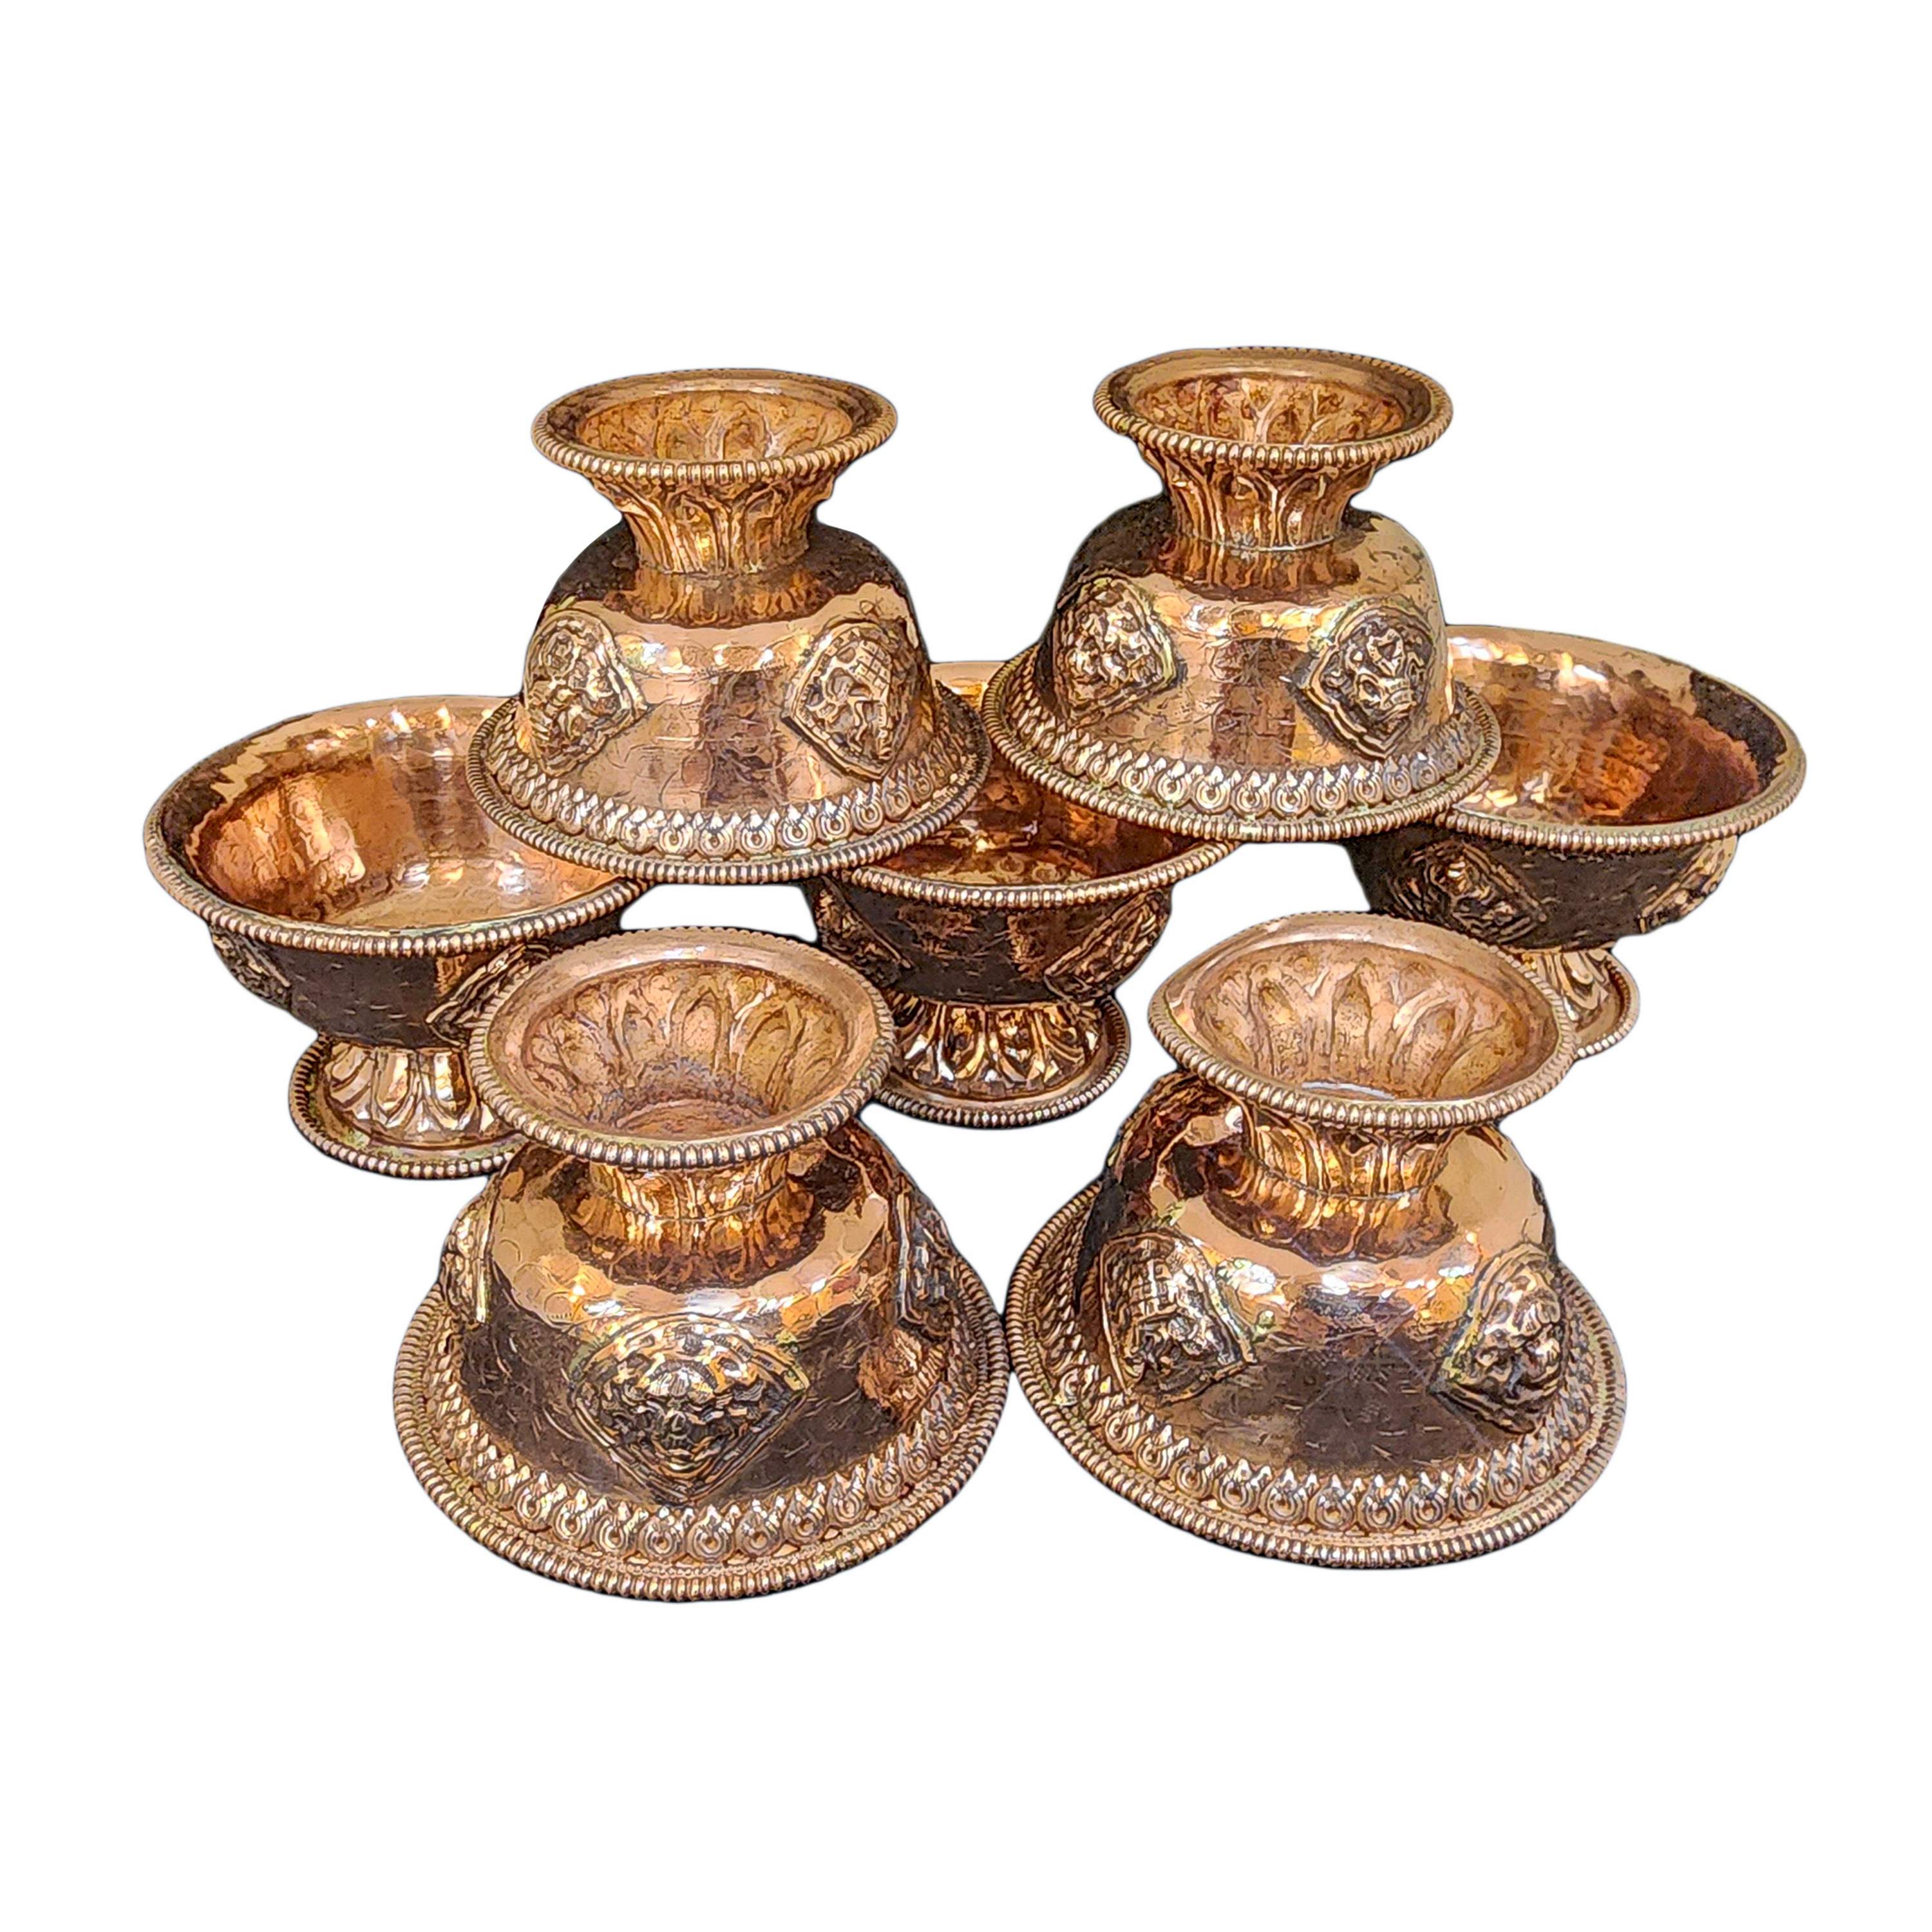 Copper Offering Bowl With Stand And Hand Carving 7 Pcs Set